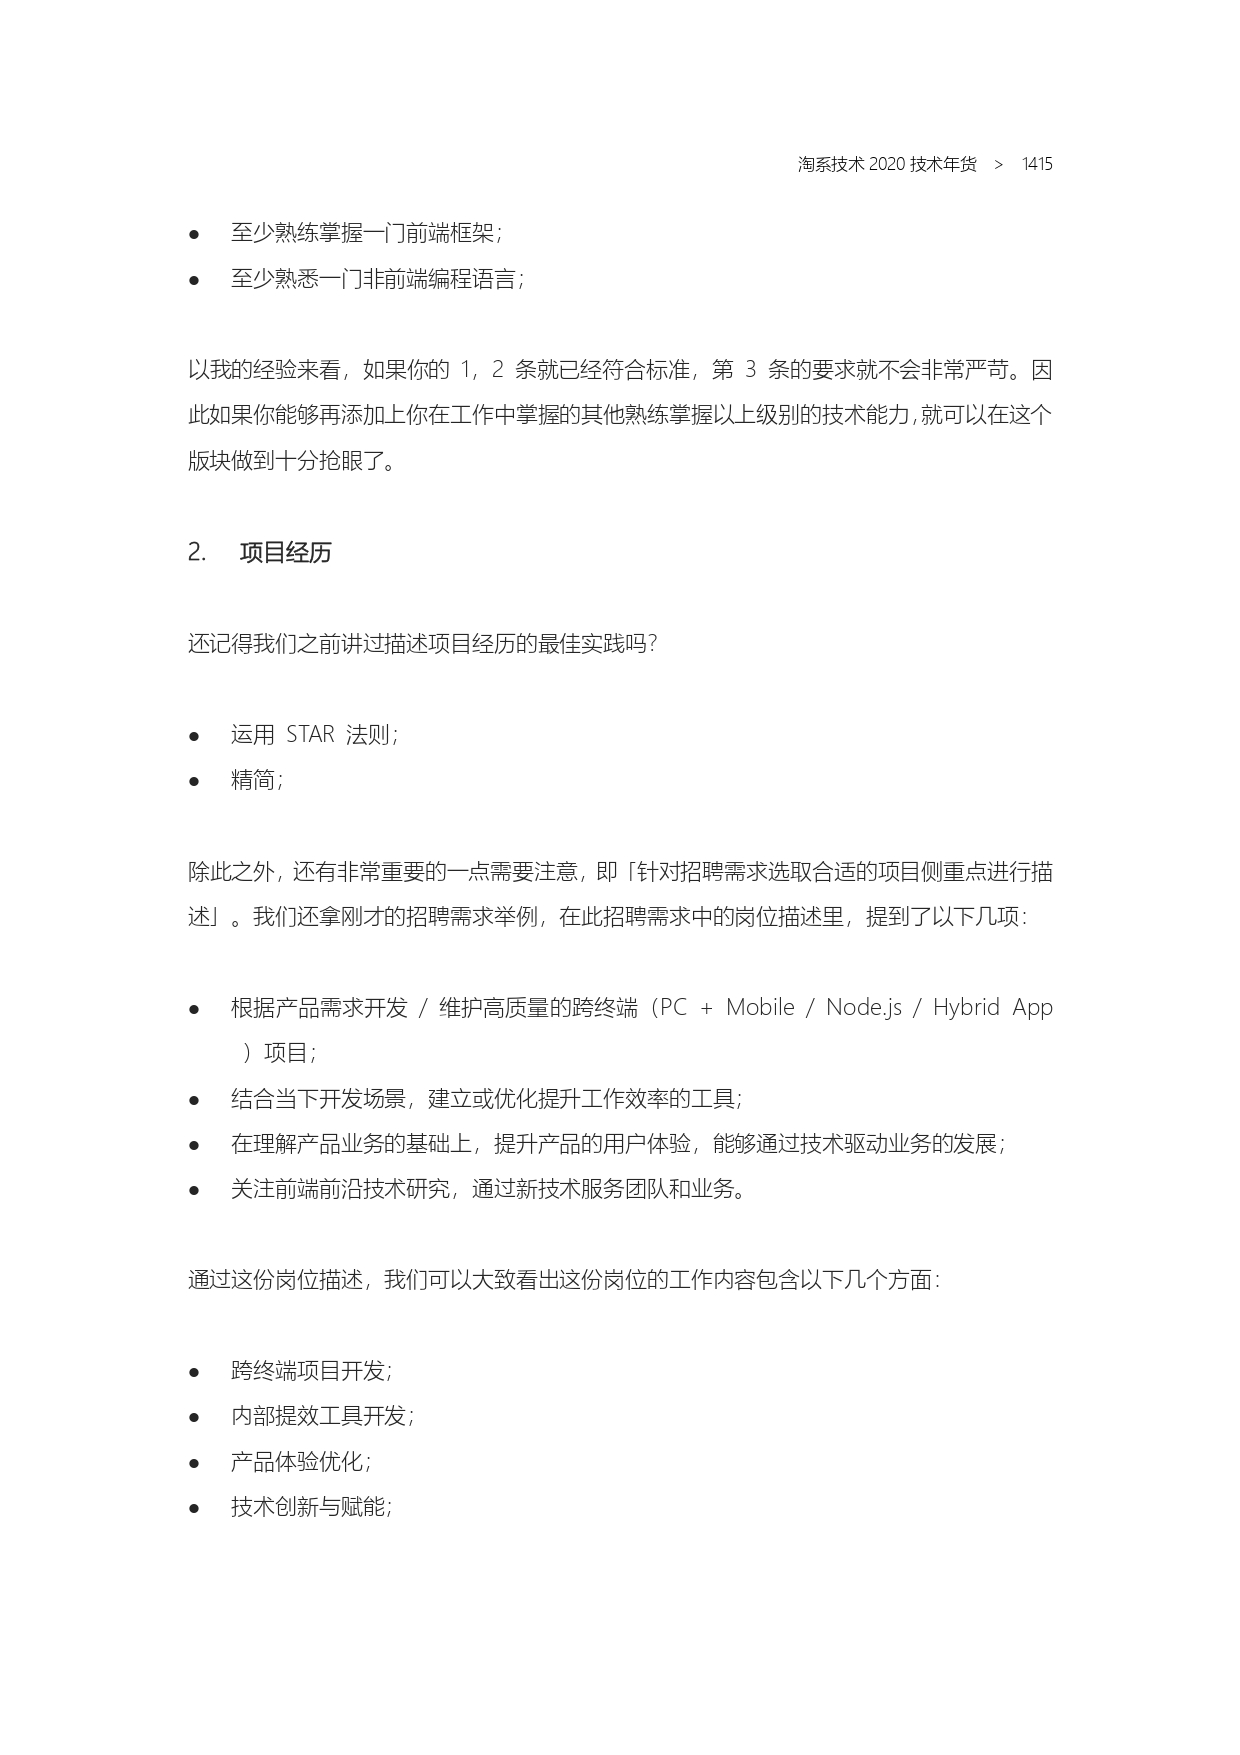 The Complete Works of Tao Technology 2020-1313-1671-1-195_page-0103.jpg